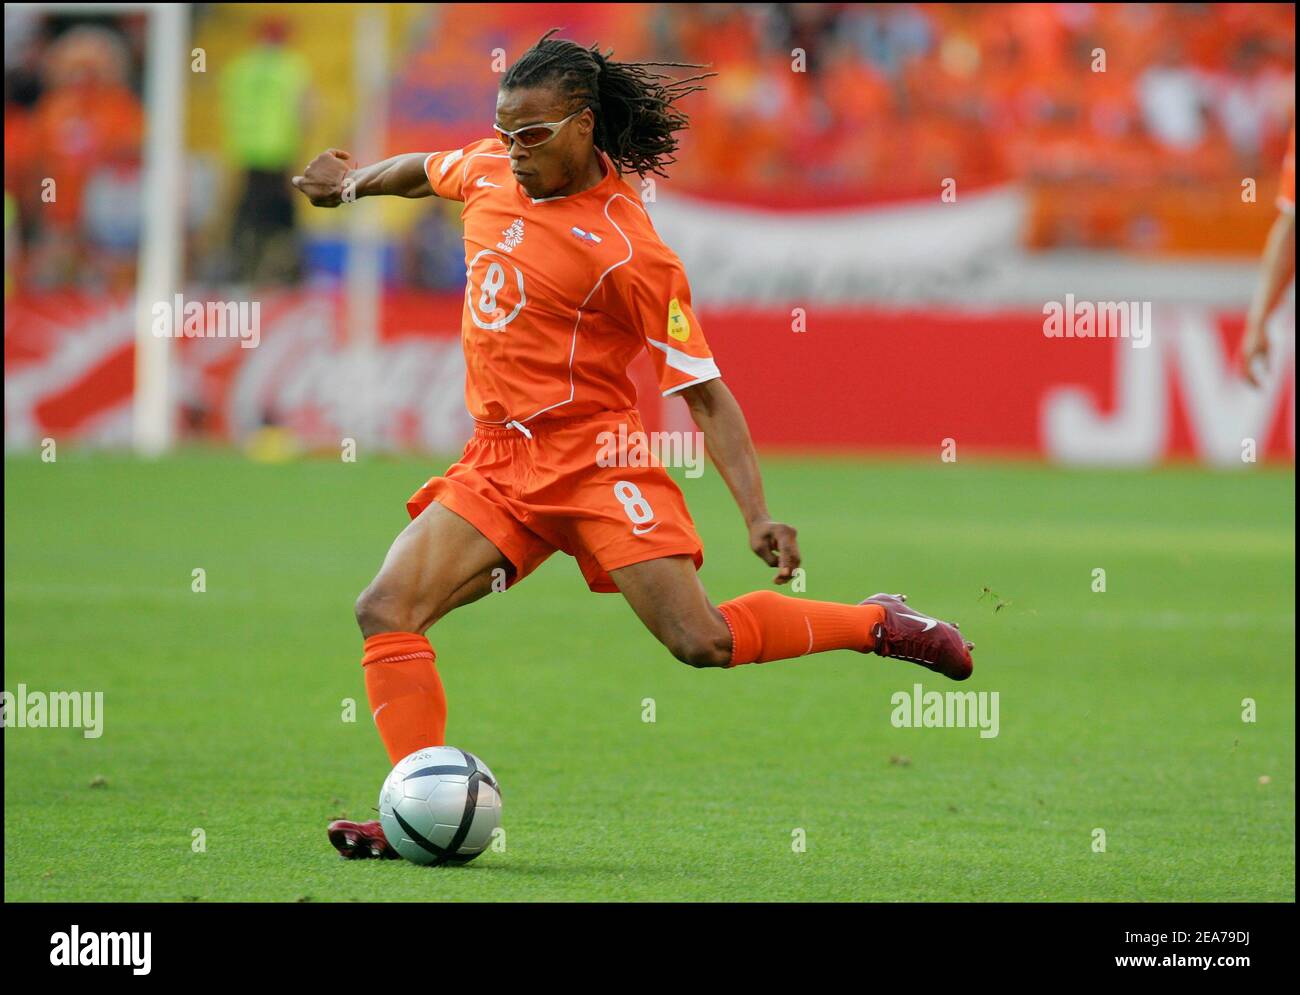 Netherlands' Edgar Davids shoots during Euro 2004 in Portugal on June 19, 2004. Photo by Christian Liewig/ABACAPRESS.COM Stock Photo